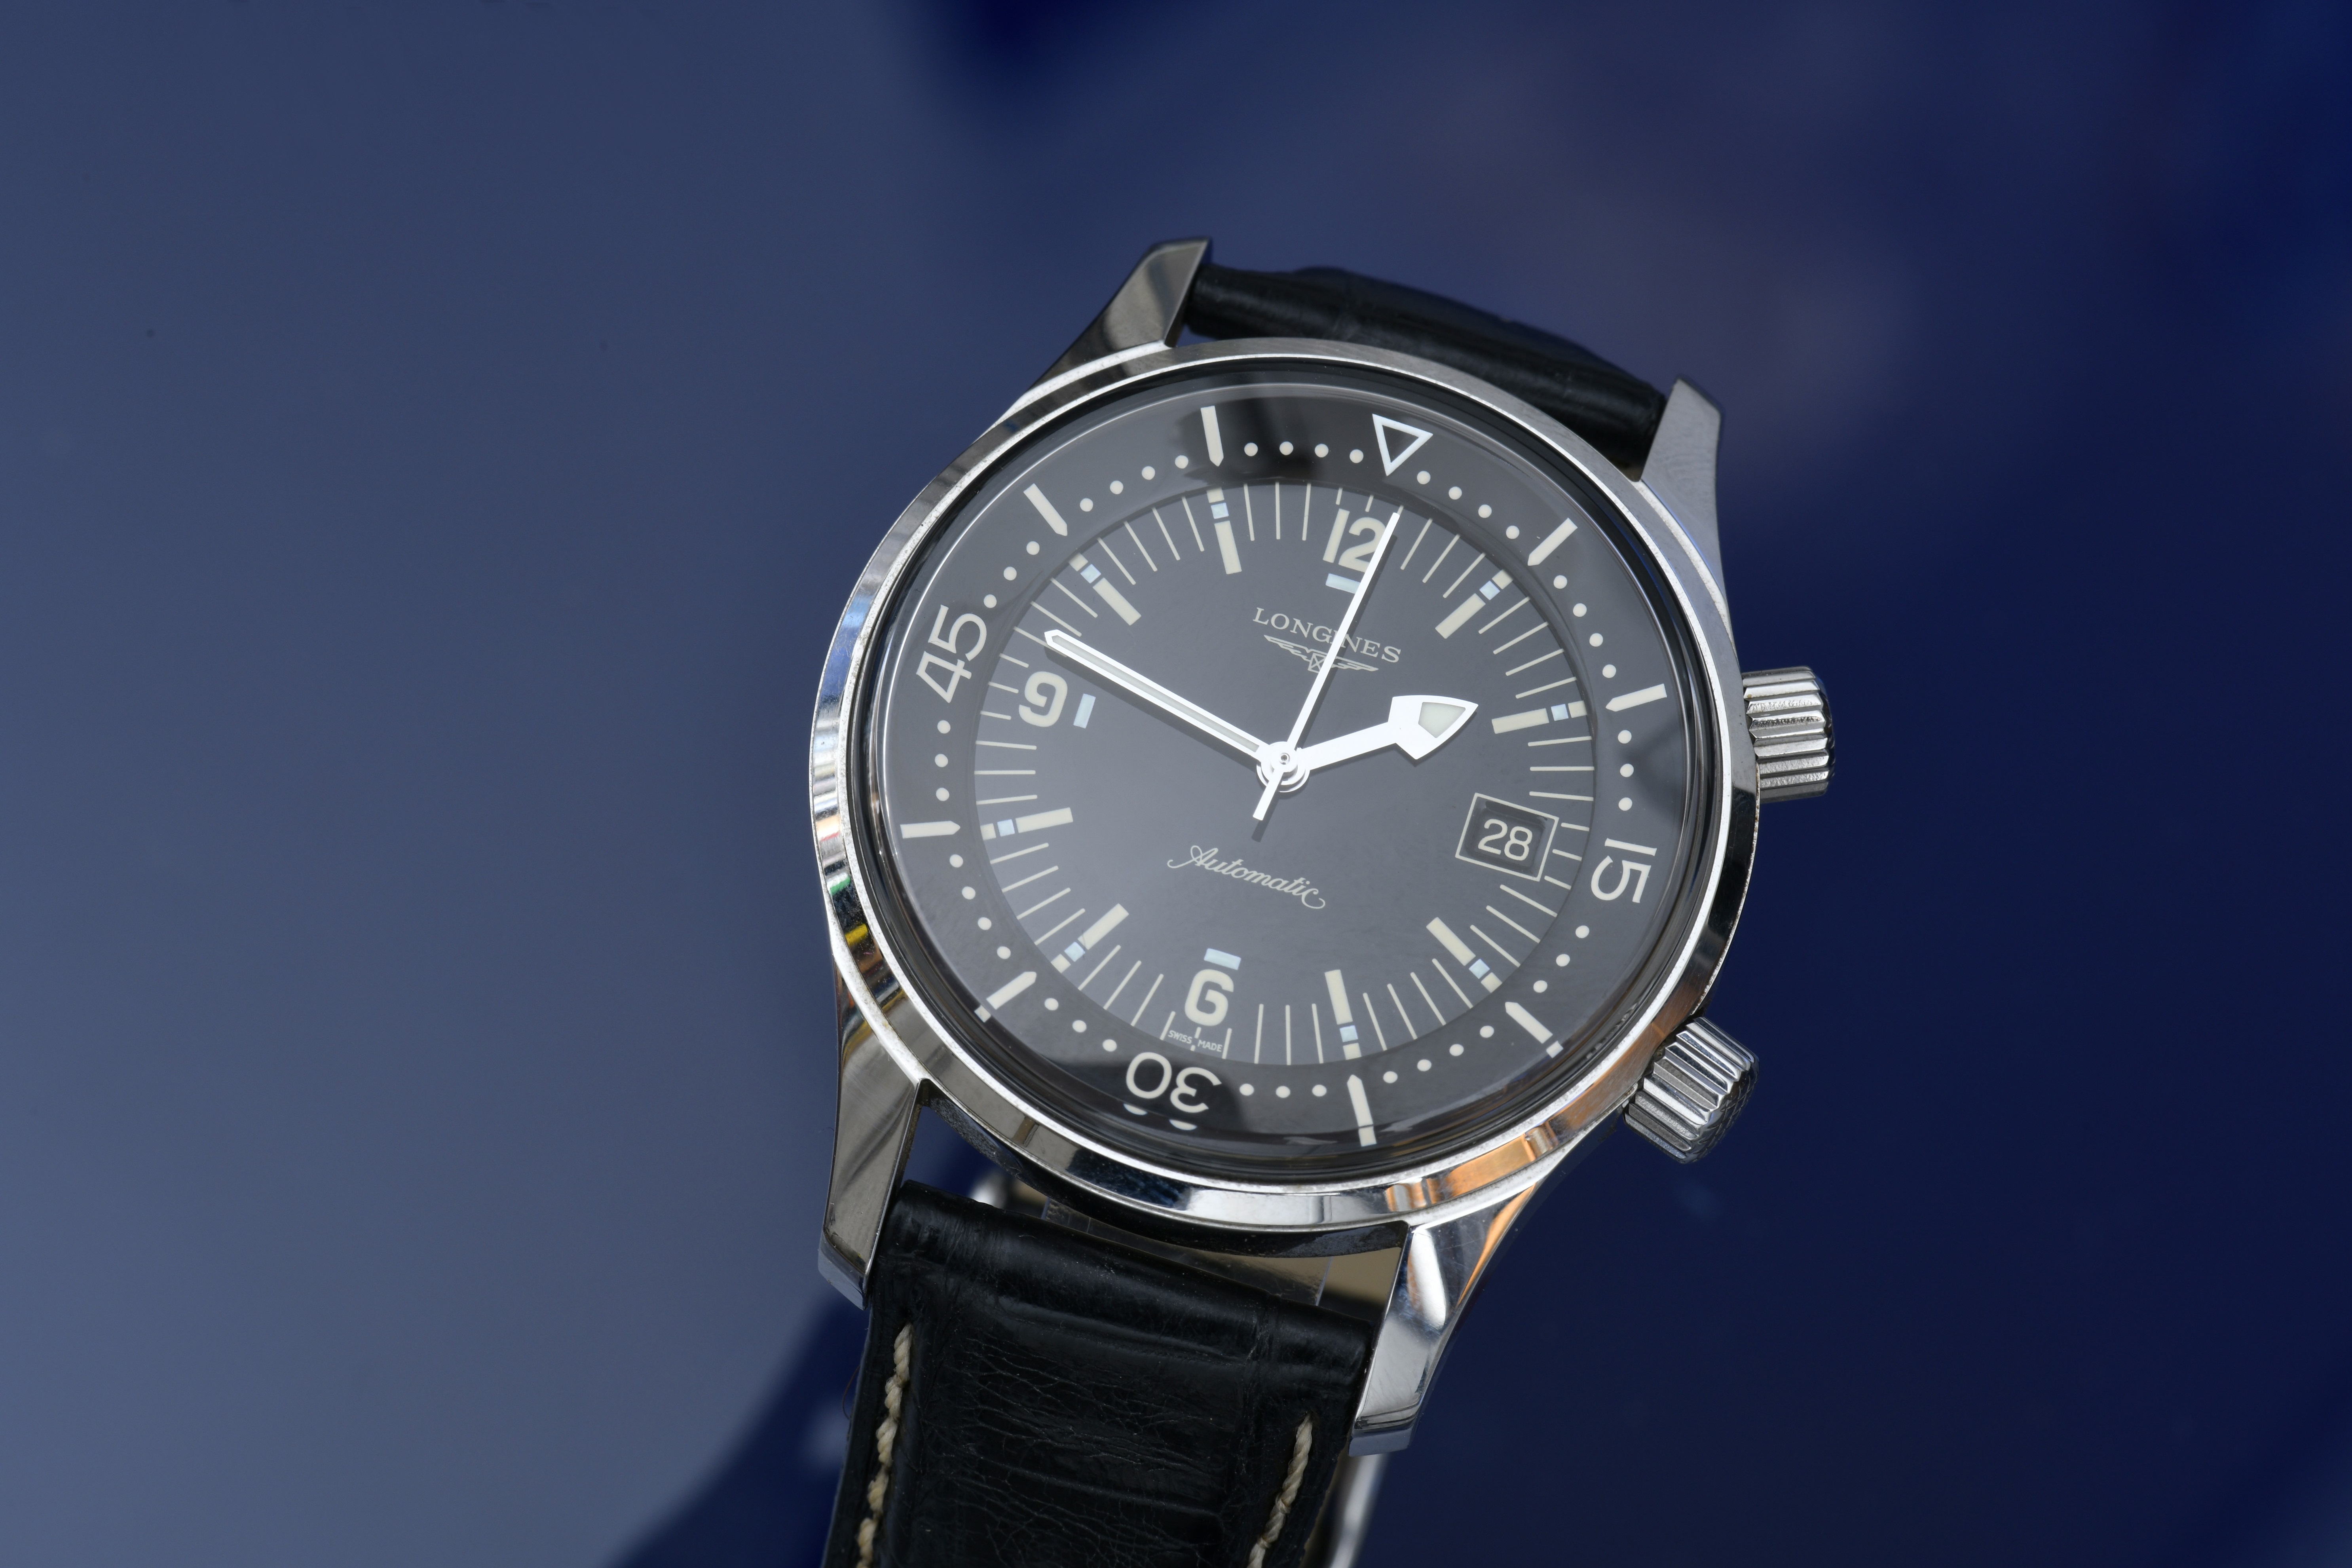 Longines Legend Diver 300 gentleman's automatic wristwatch ref. L36744 with date aperture, - Image 2 of 2